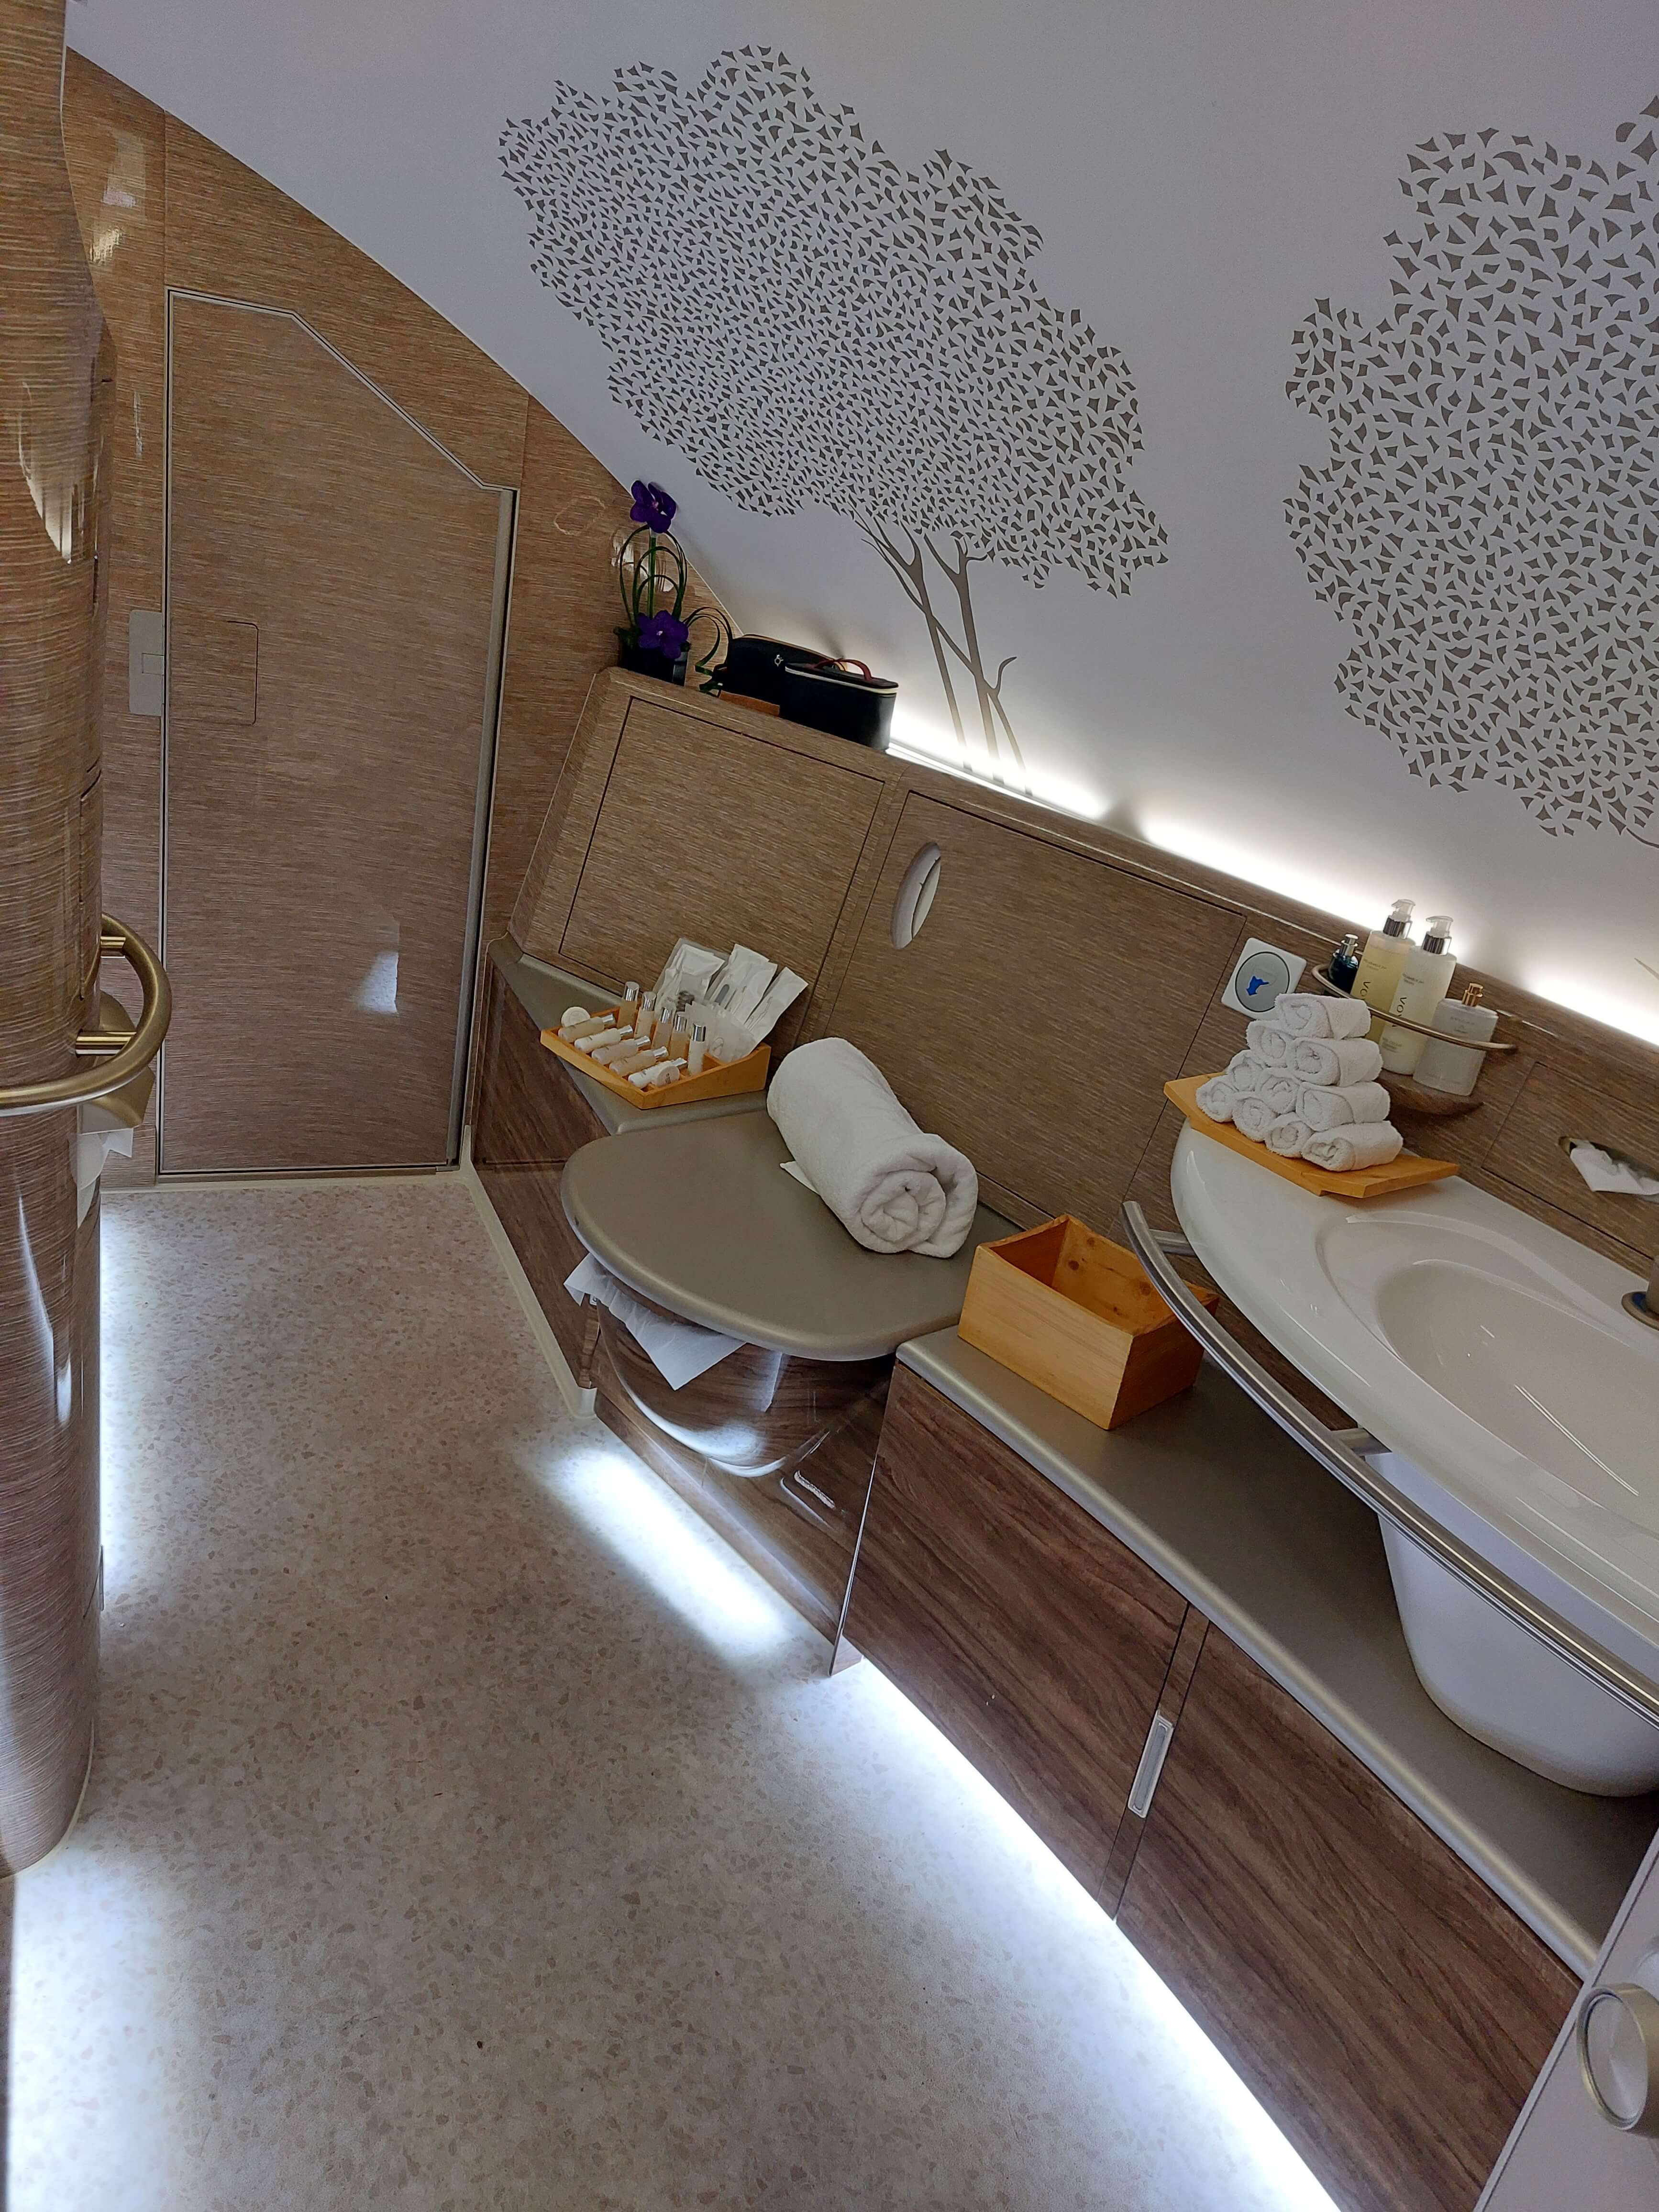 The Emirates First Class shower spa on the A380